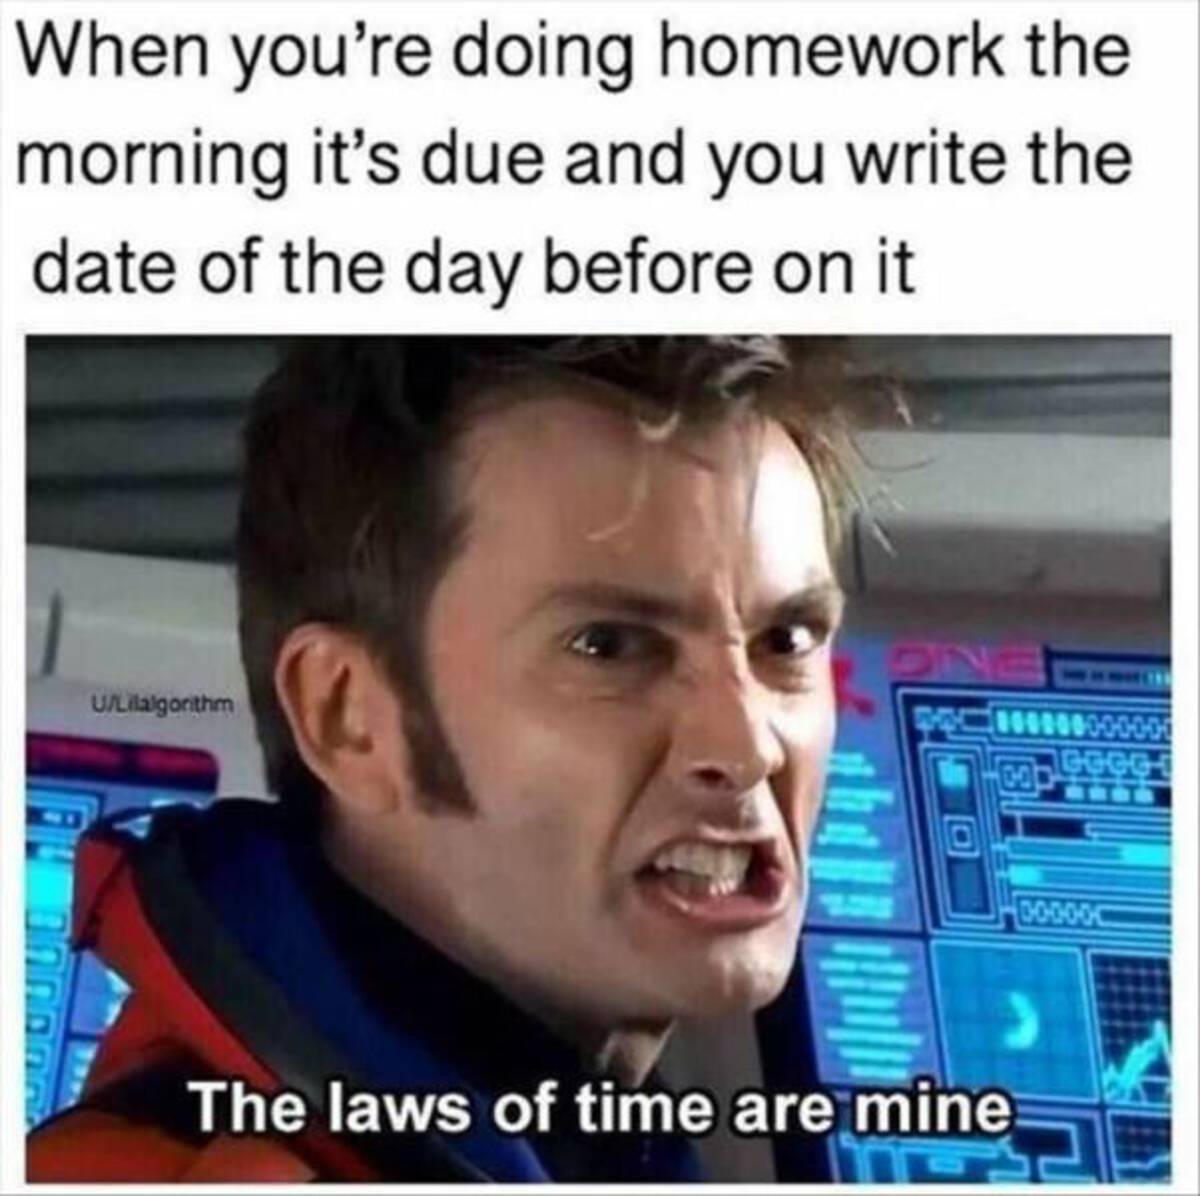 laws of time are mine template - When you're doing homework the morning it's due and you write the date of the day before on it 20 ULilalgorithm The laws of time are mine 00 00000C